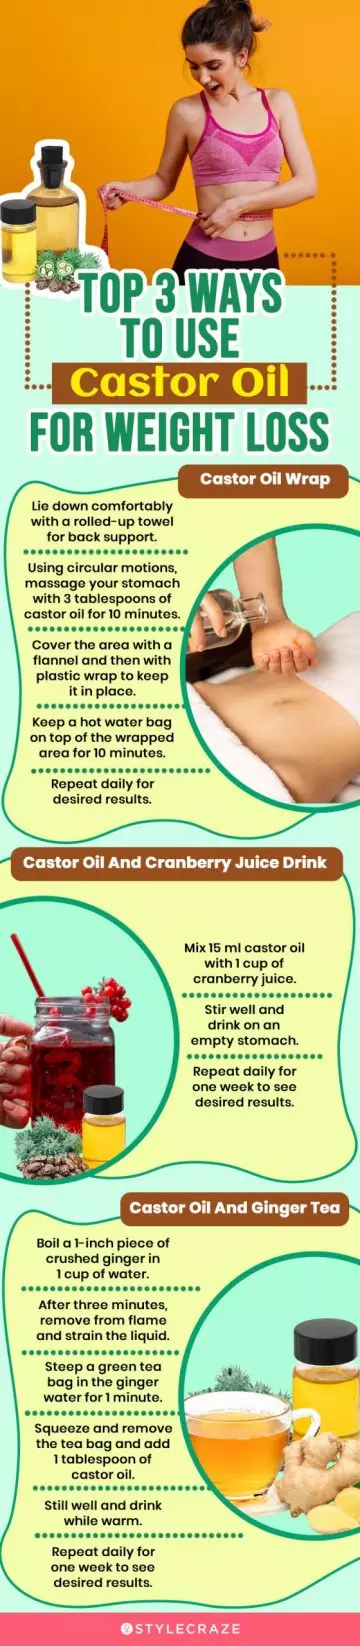 top 3 ways to use castor oil for weight loss (infographic)